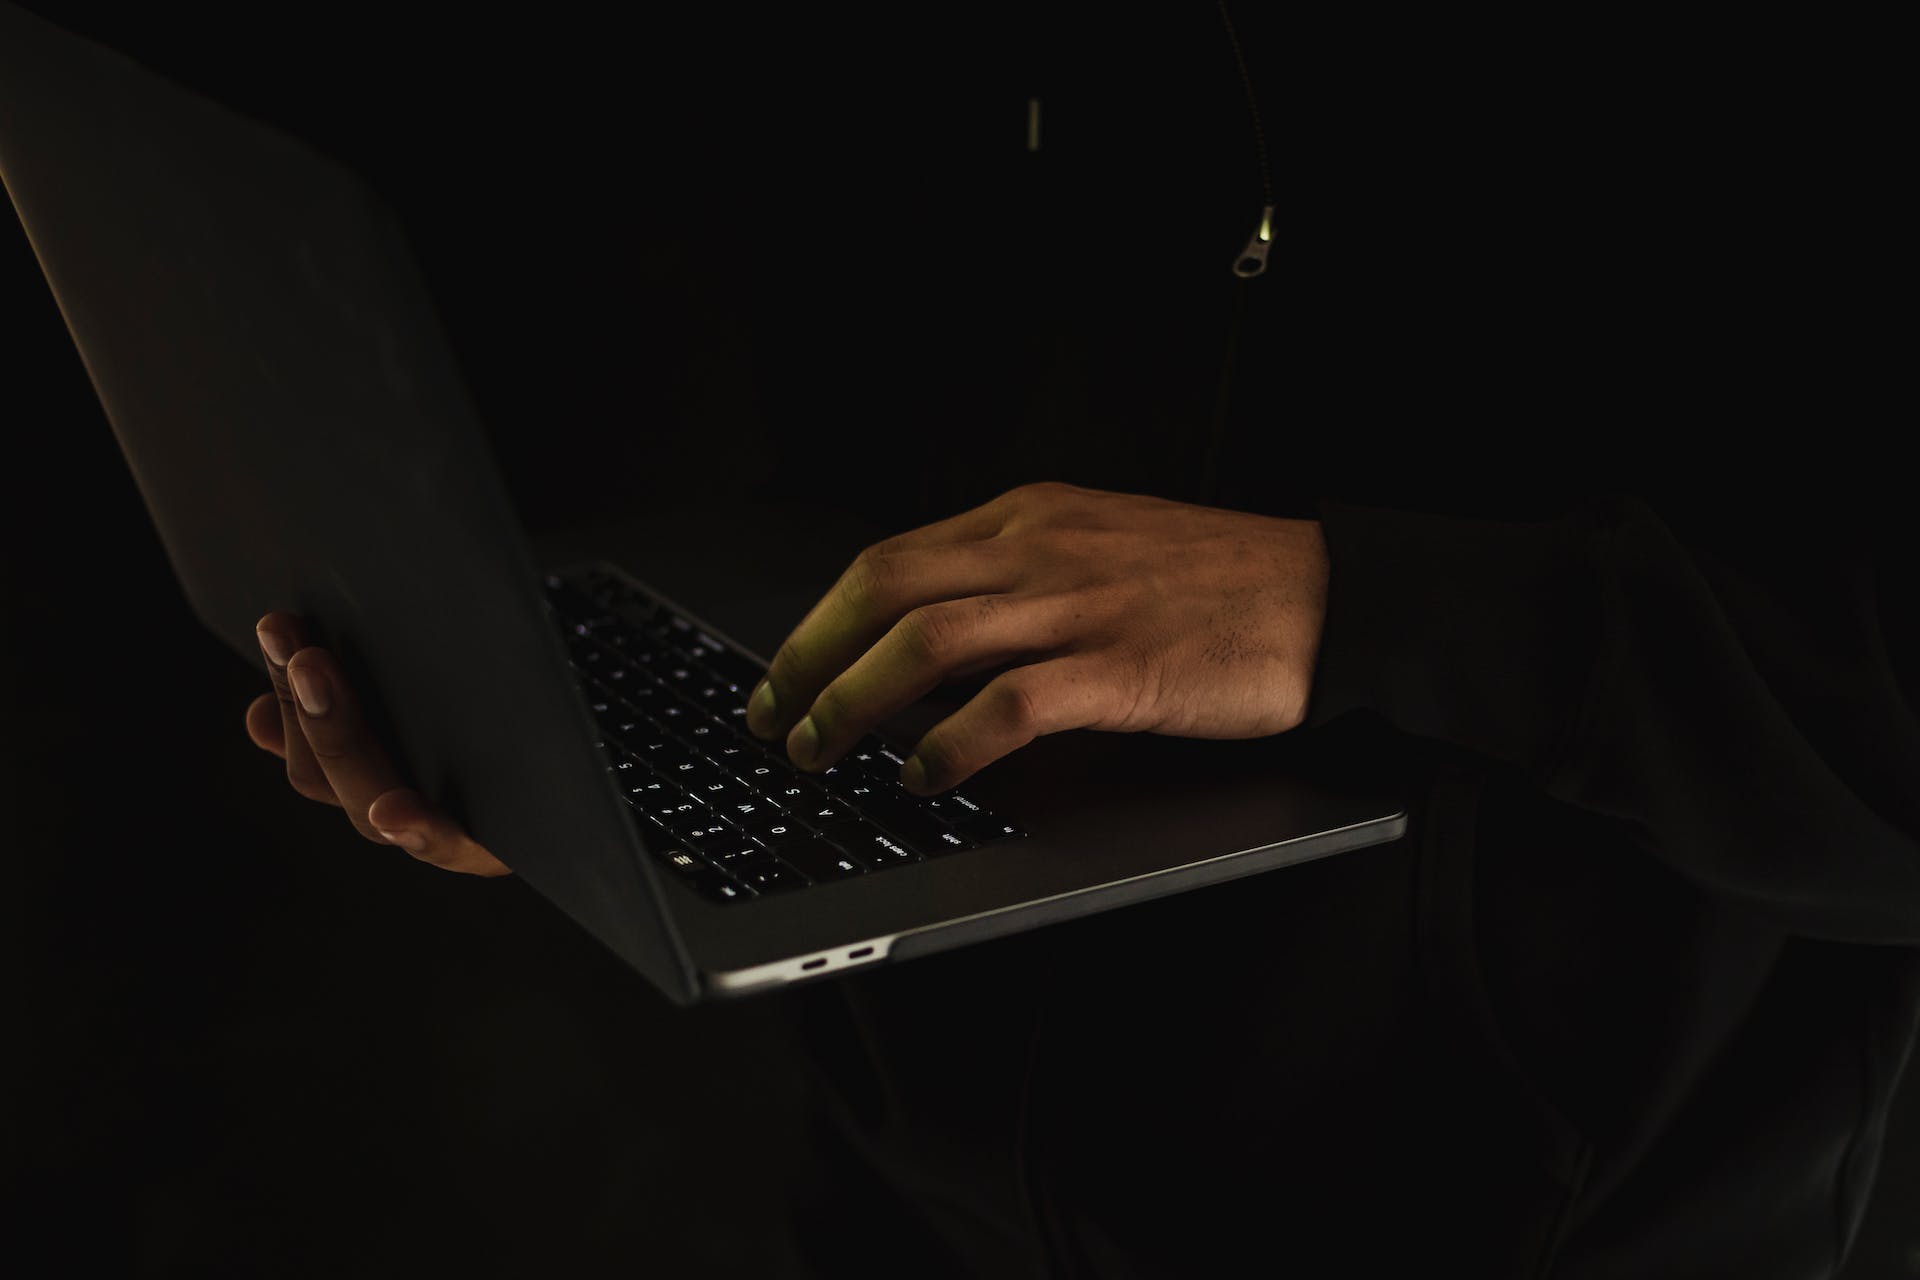 A person holding a laptop | Source: Pexels